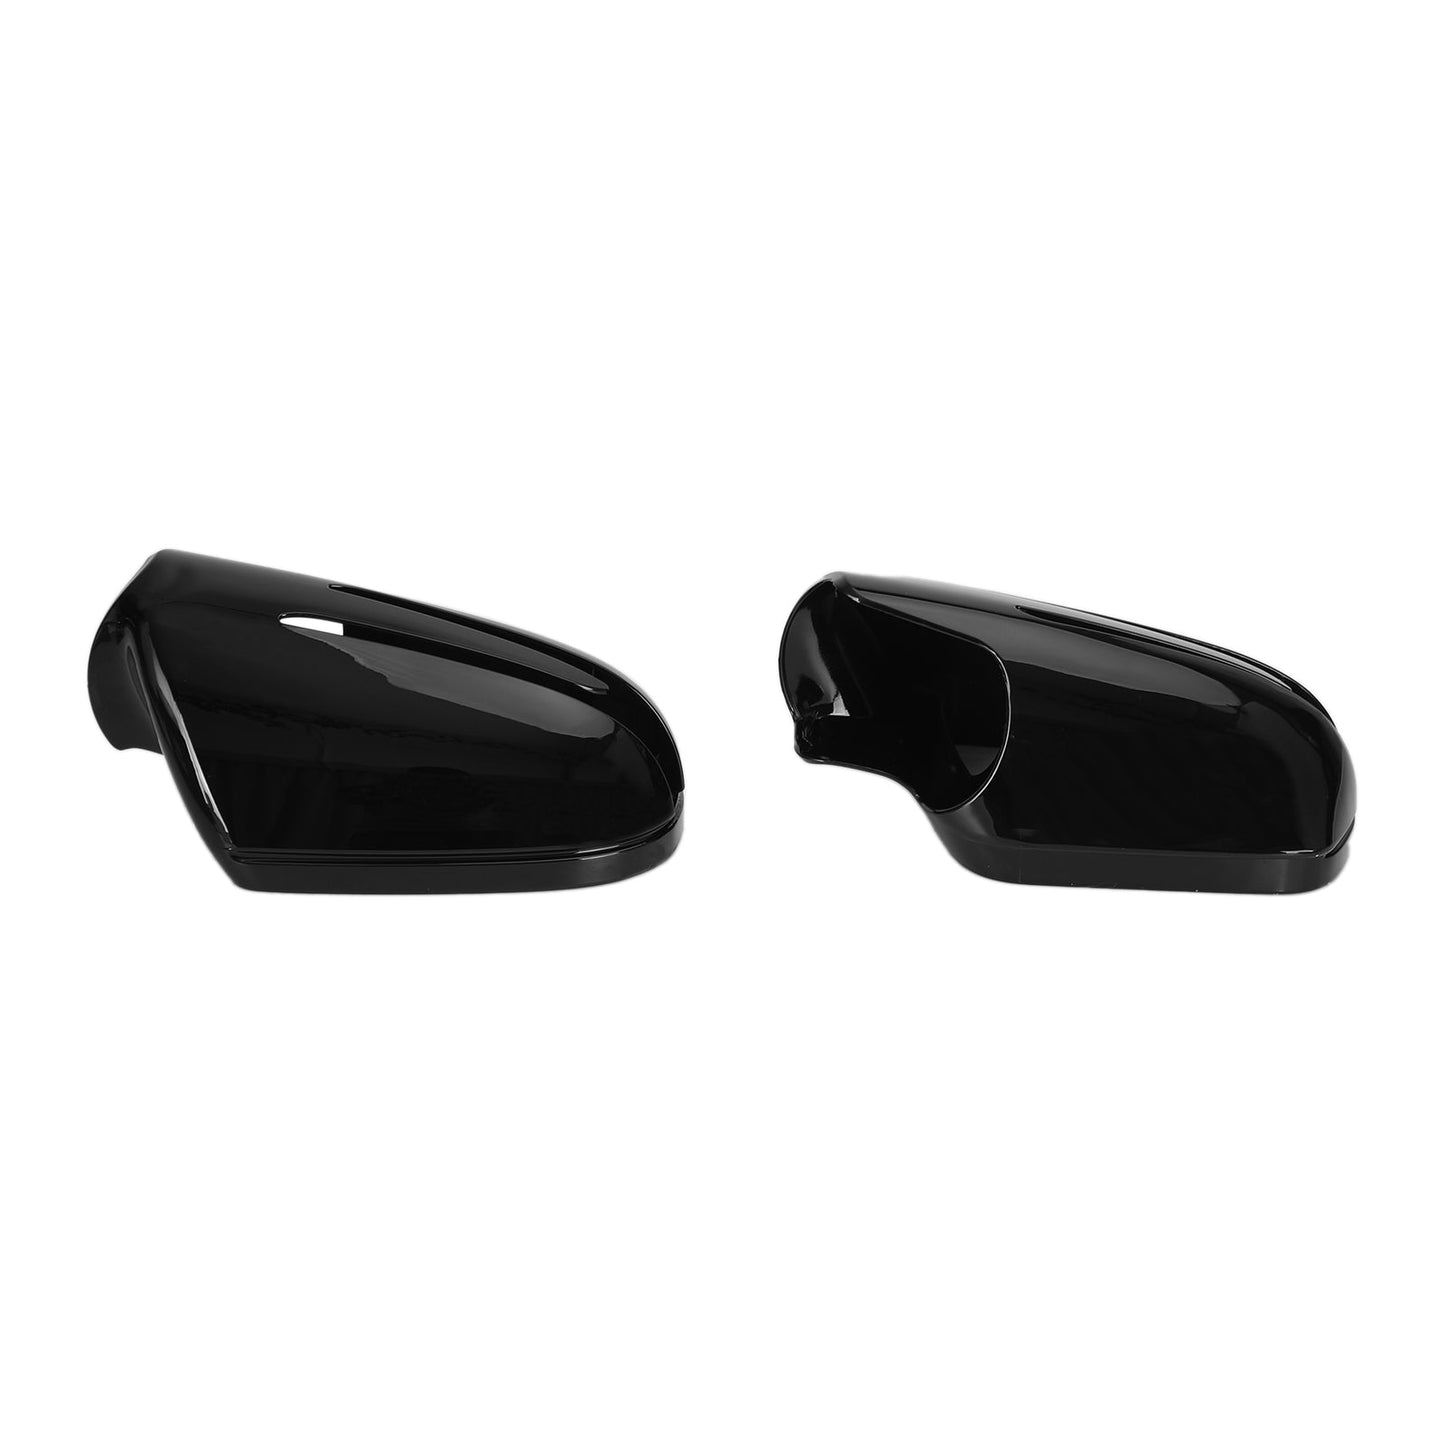 2008-UP Mercedes BENZ SL-Class R230 Facelift Pair Rearview Mirror Cover Gloss 1718100364 1718100564 2198100115 2198102576